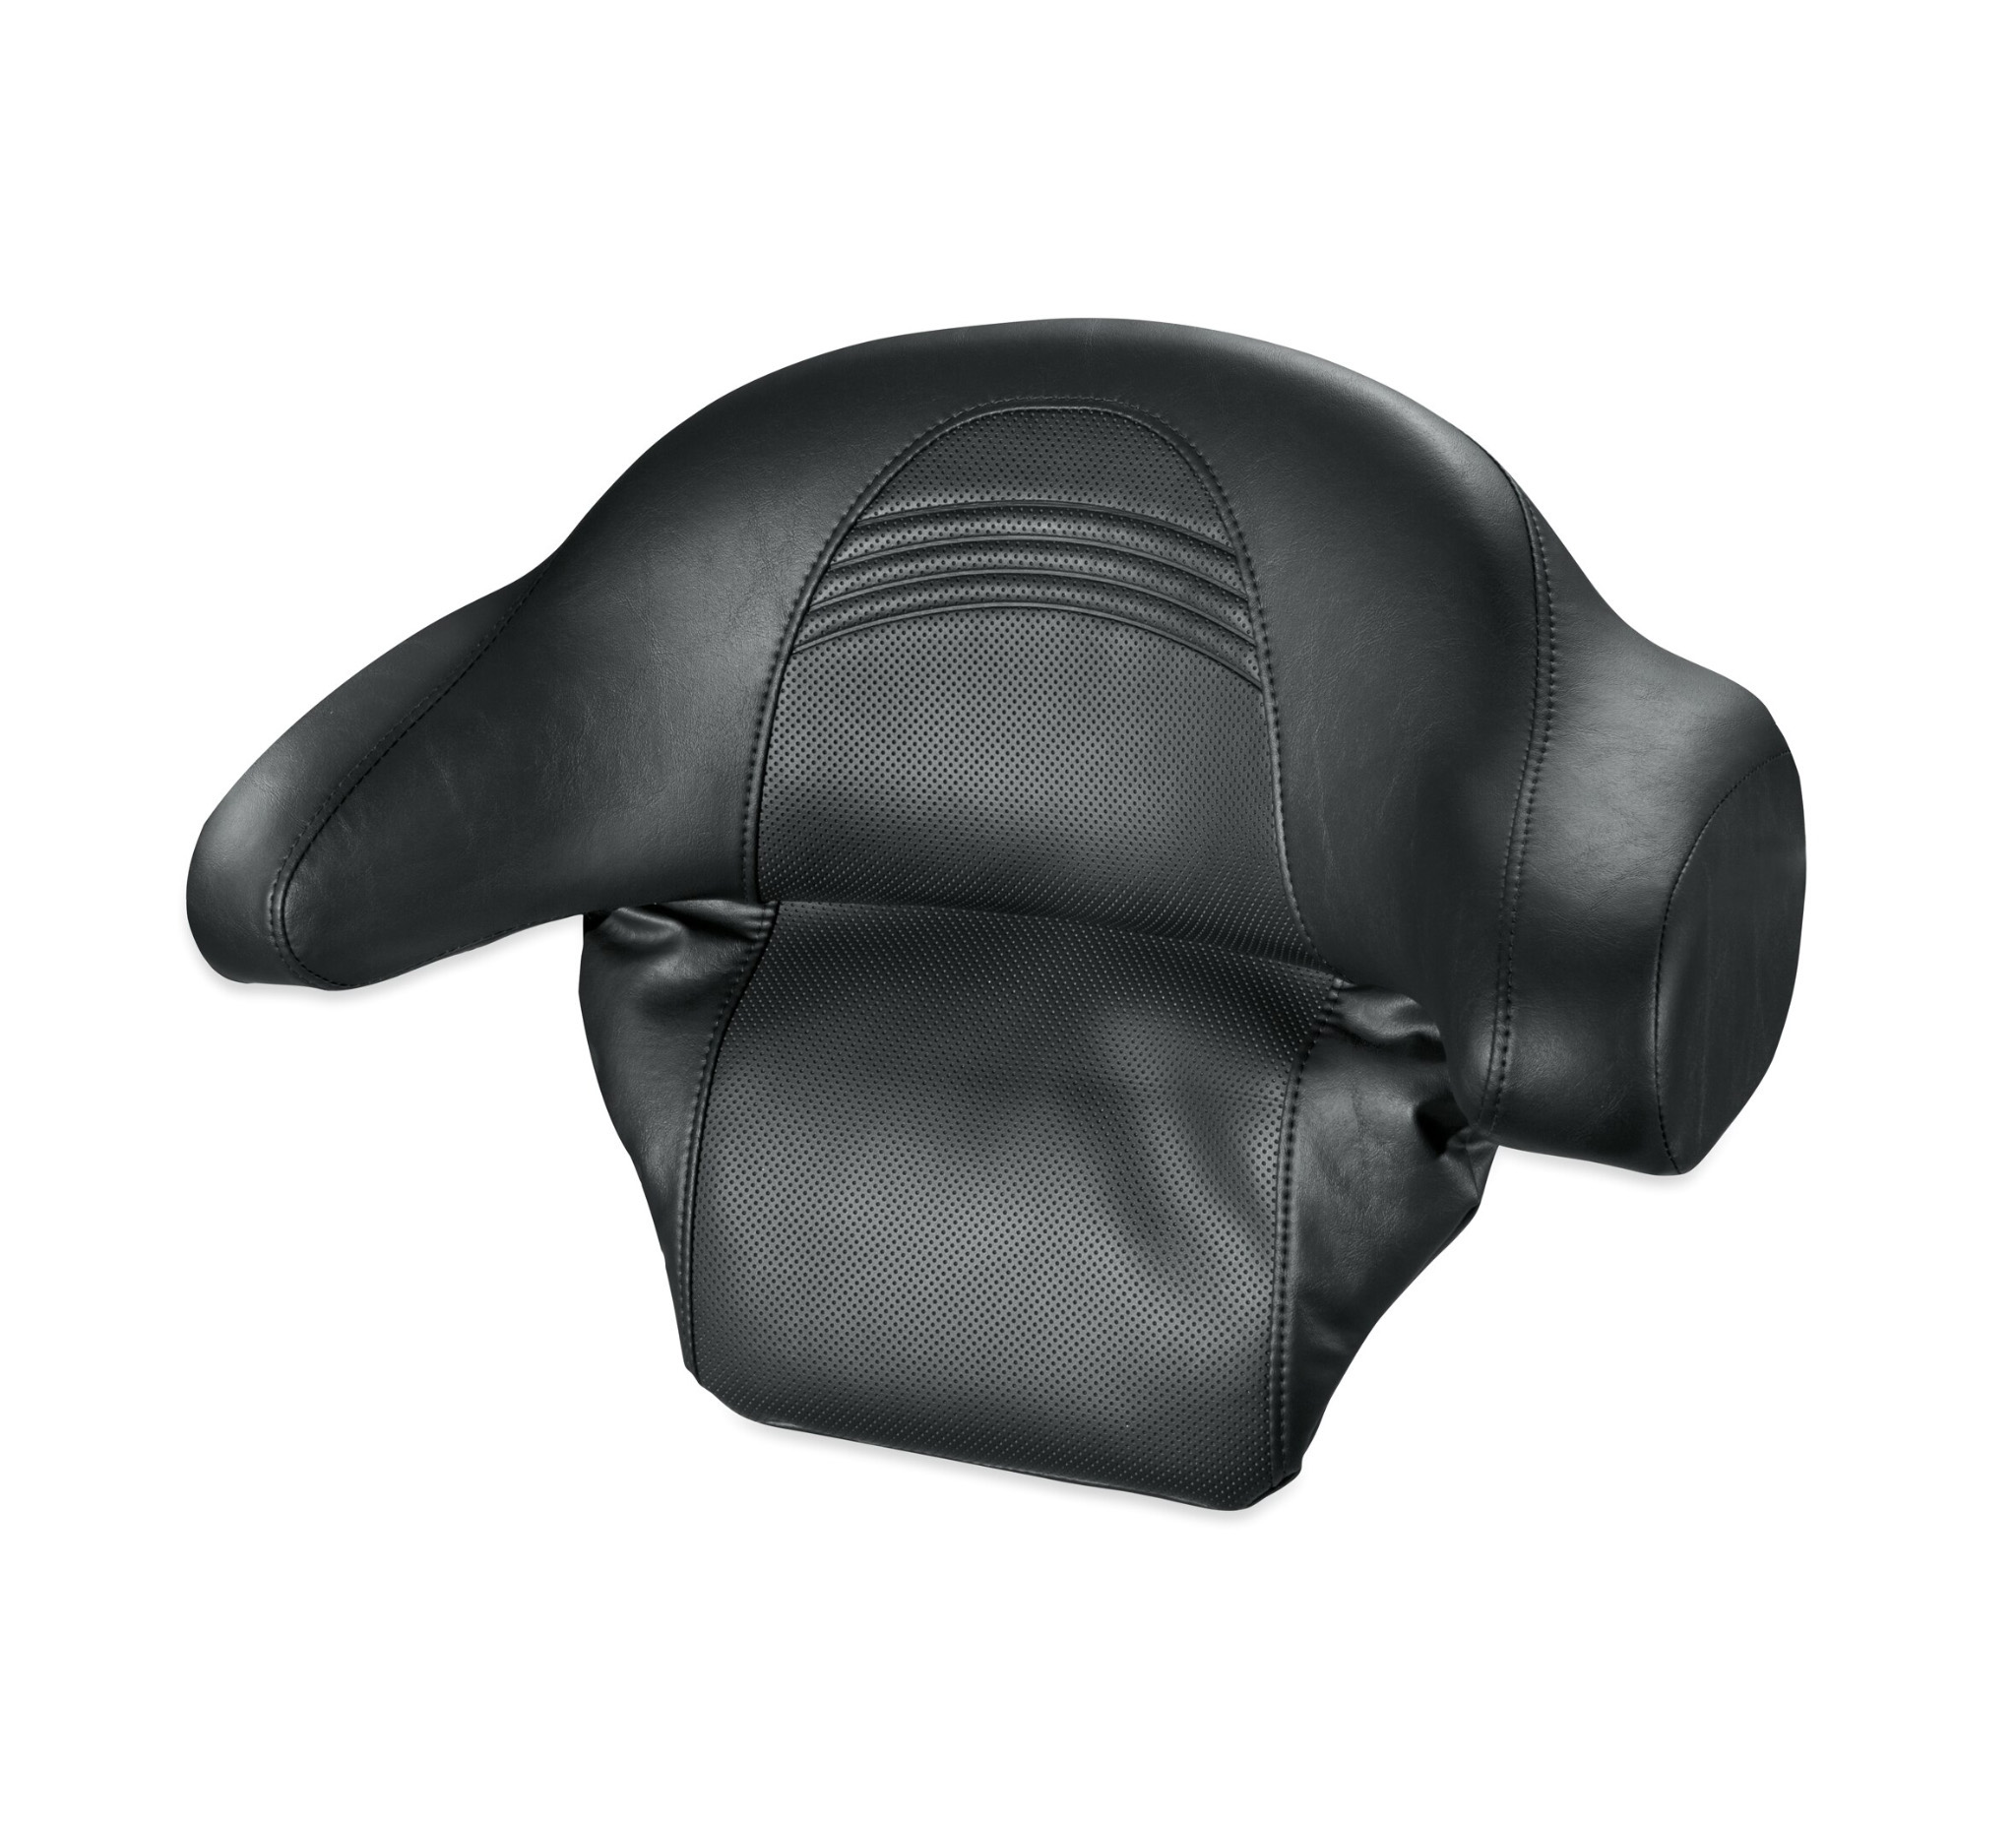 XMT-MOTO King Tour-Pack Backrest Pad fits for Harley Davidson Touring and Tri Glide 2014-later 